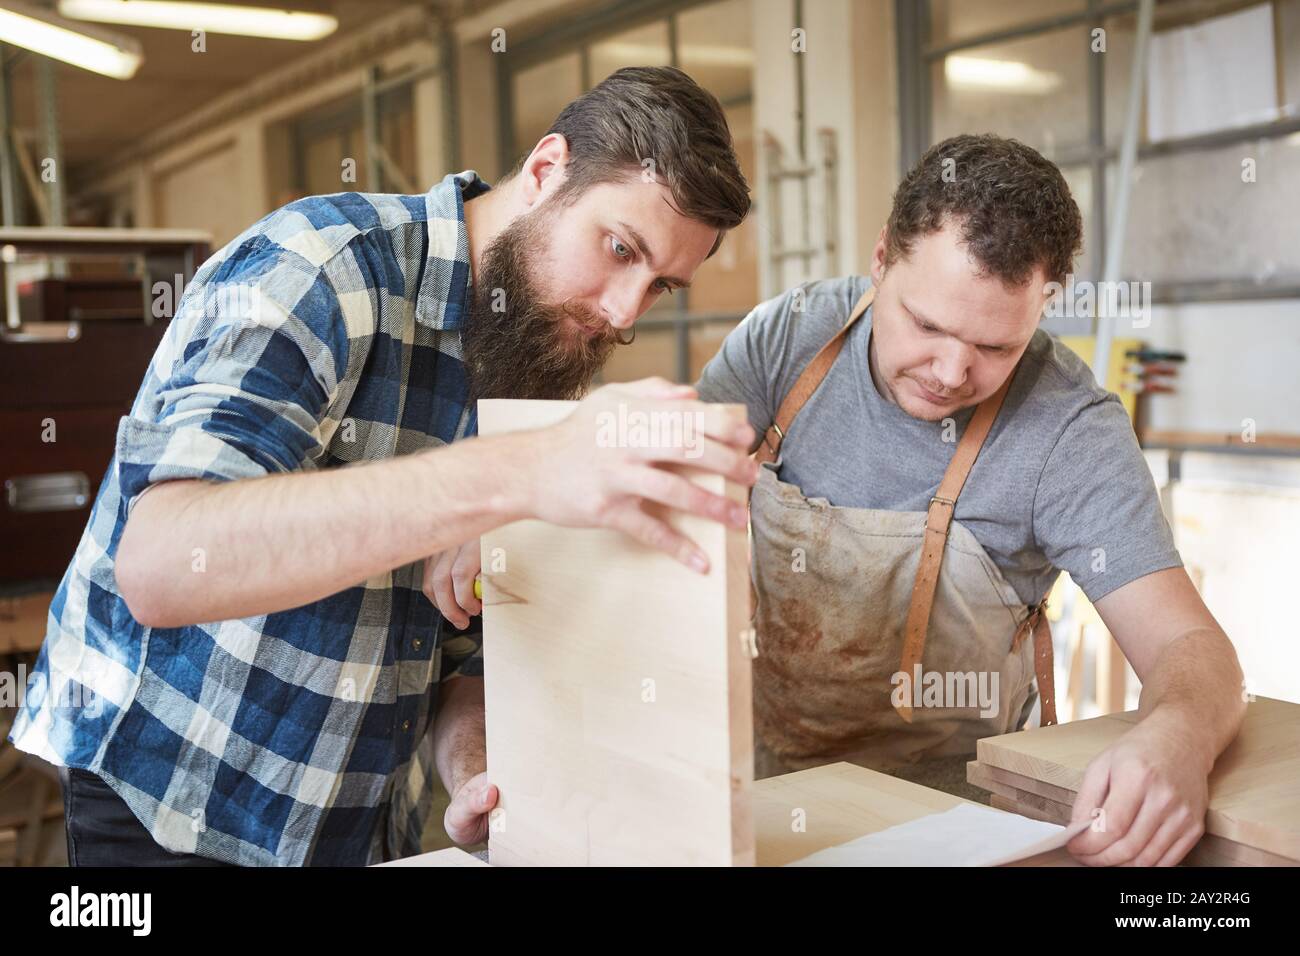 Two carpenters as furniture makers in the joinery build a wooden shelf Stock Photo